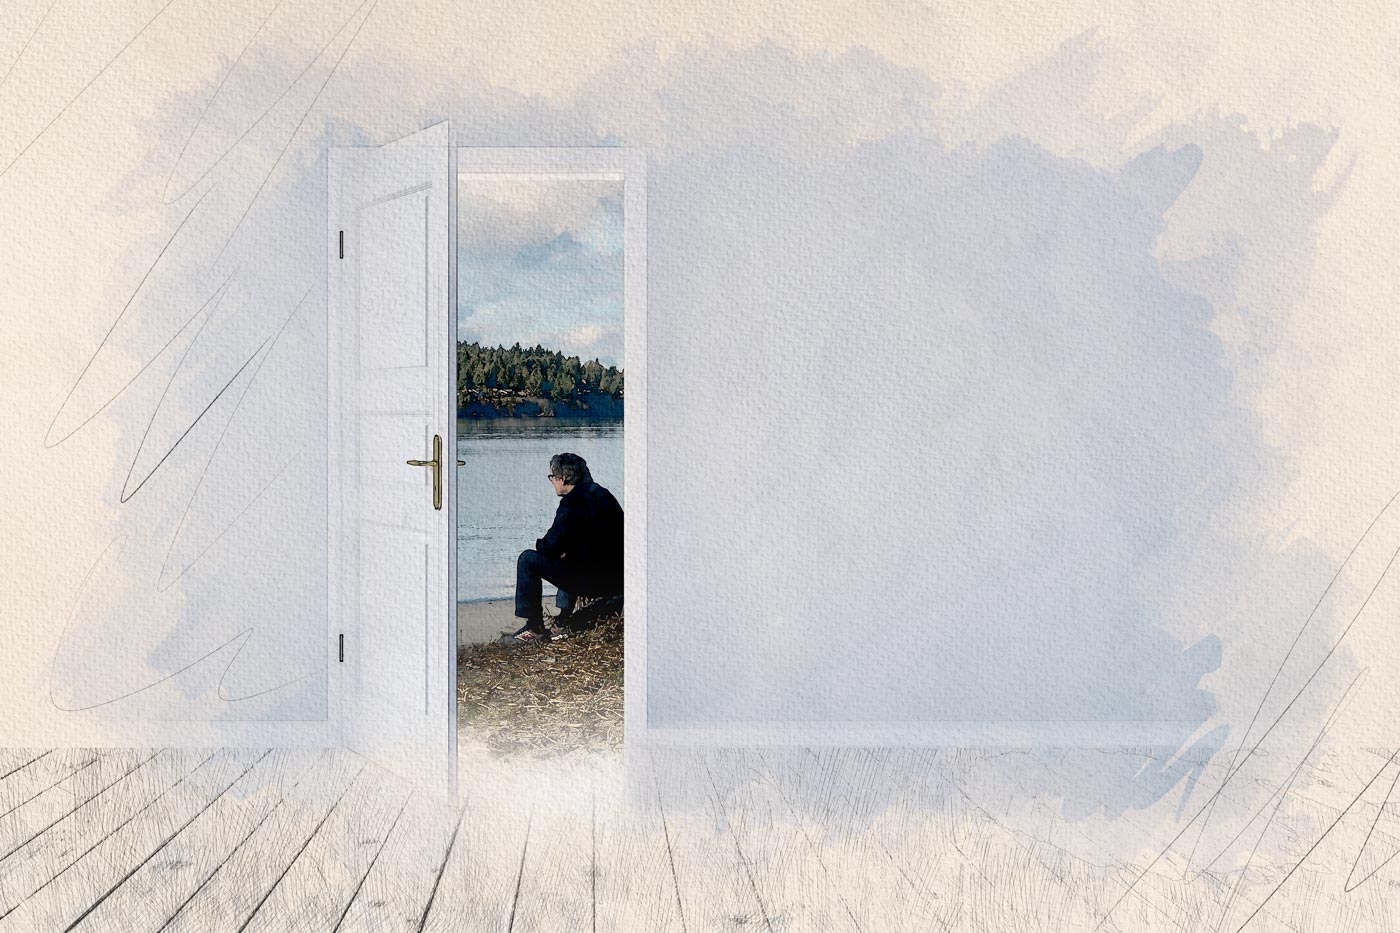 Image of an open doorway with Mark sitting on a beach look out over the water